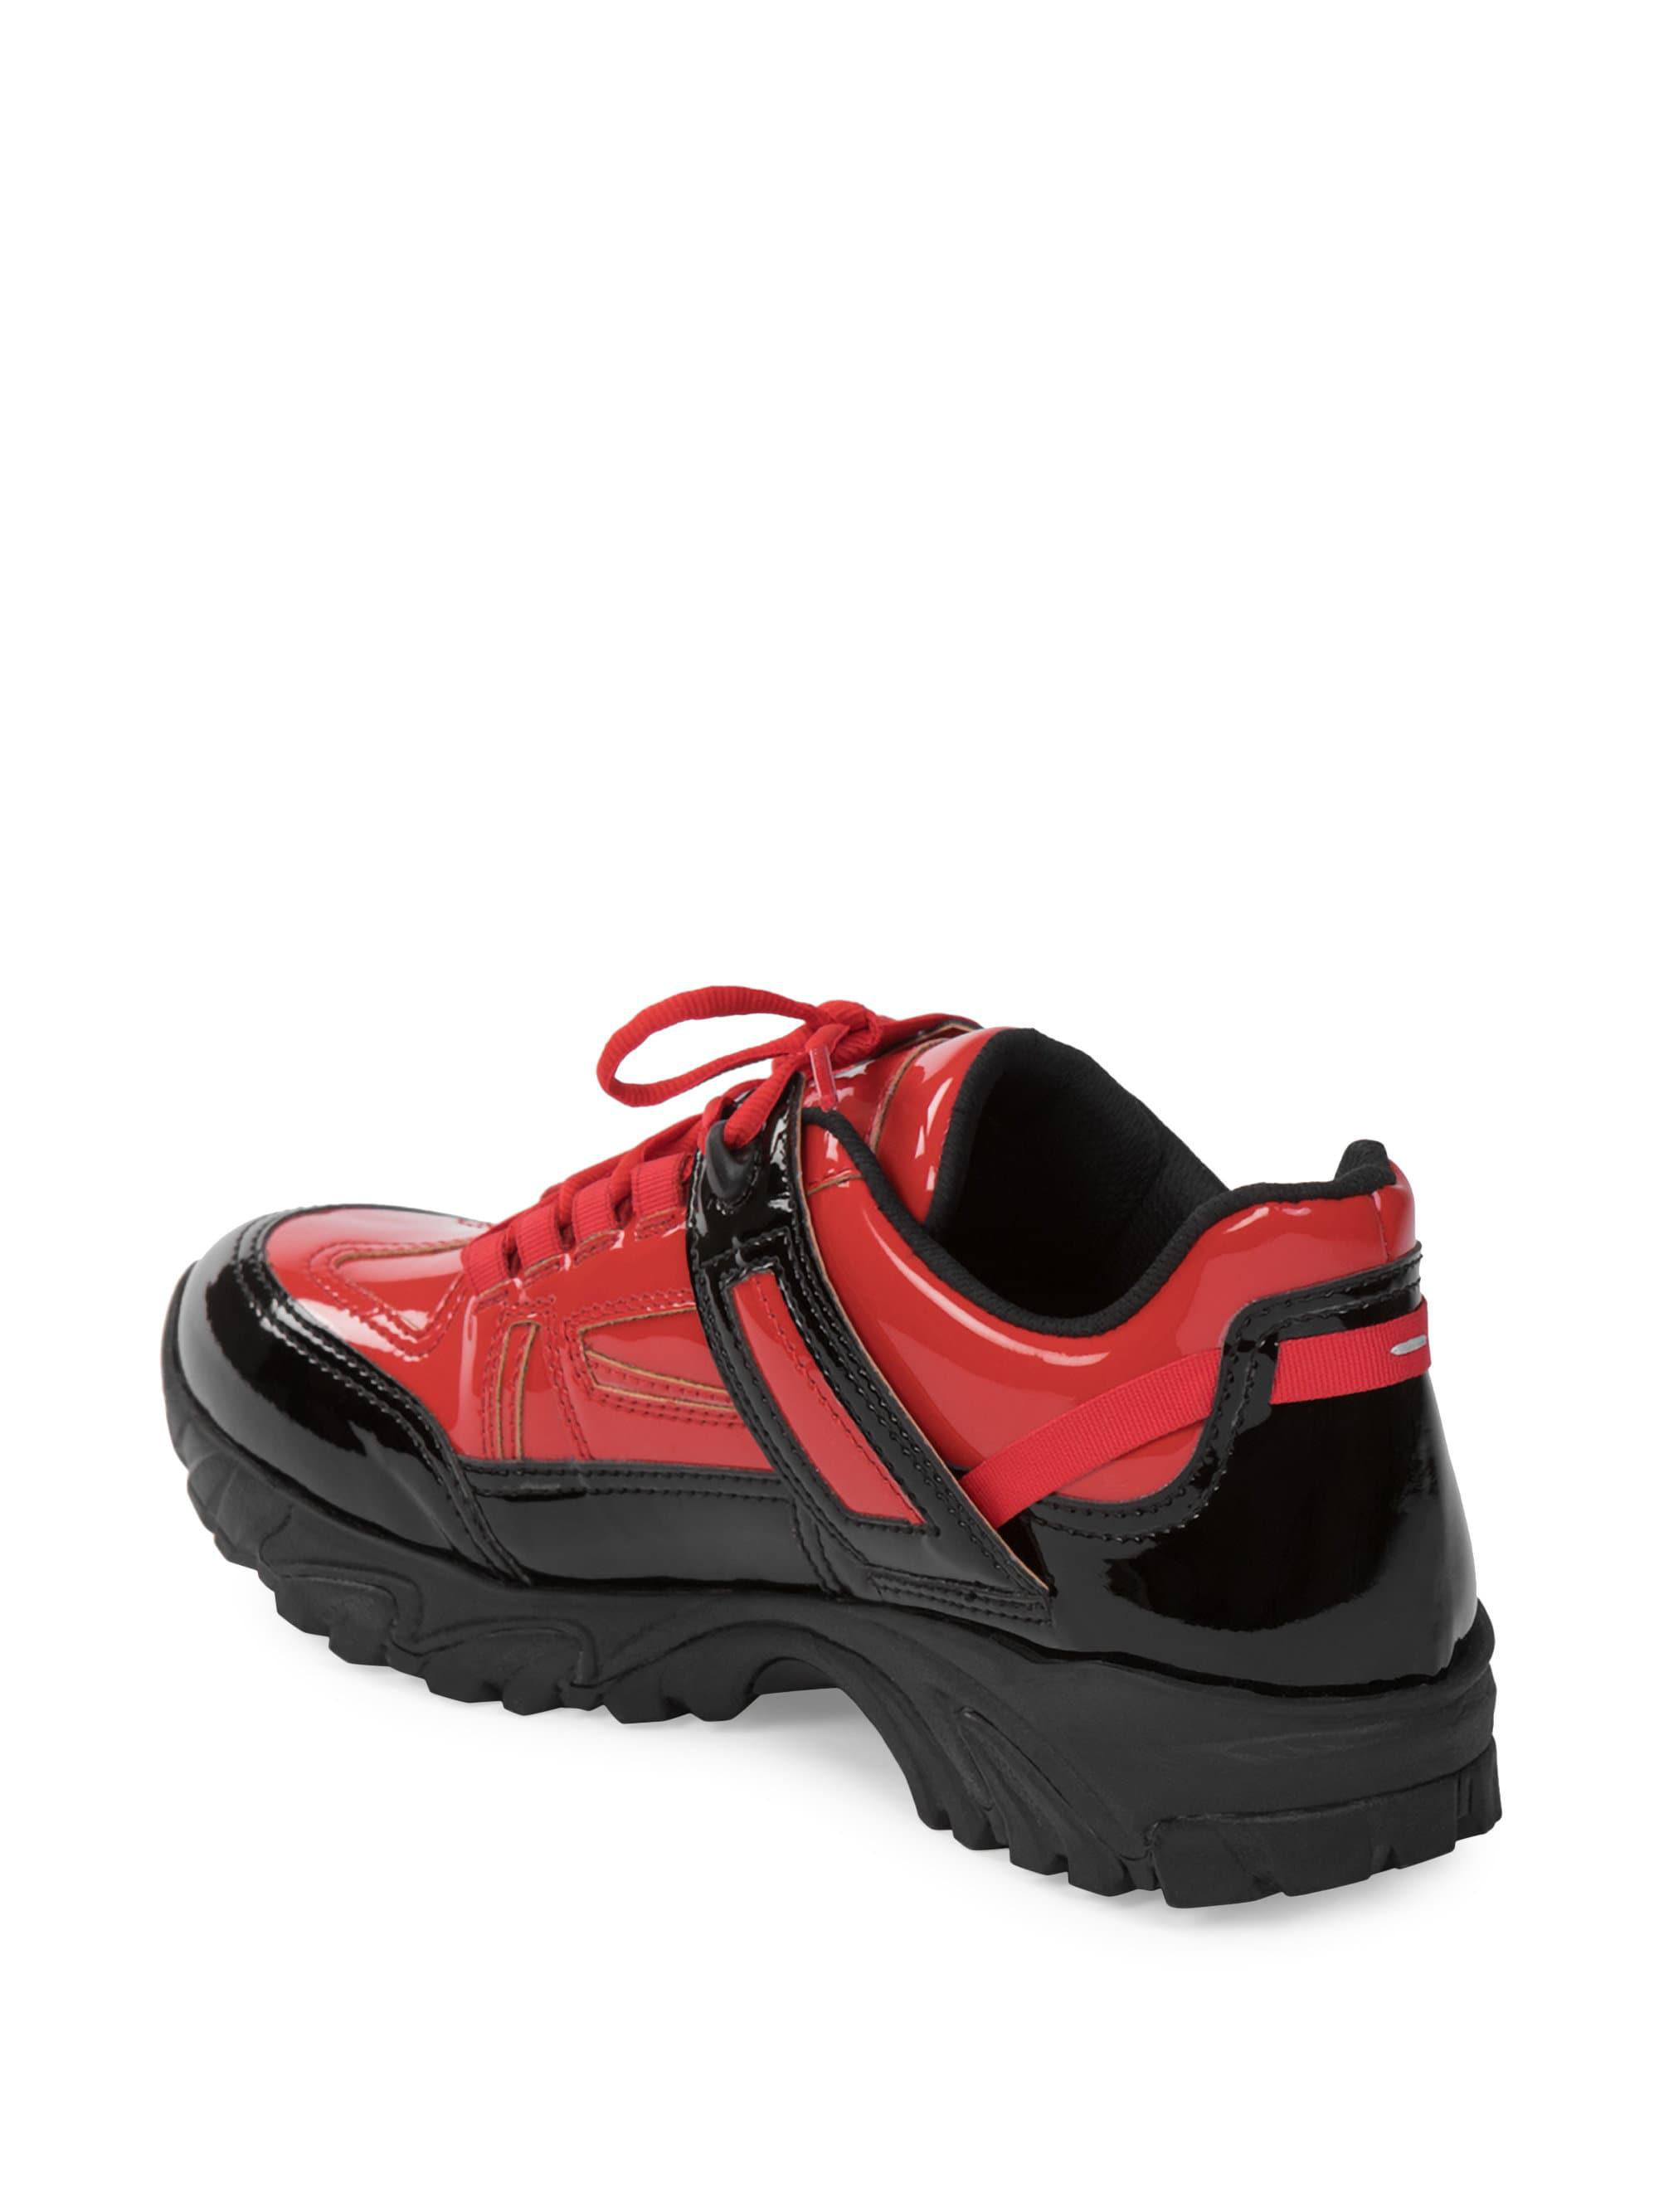 Maison Margiela Sms Security Sneakers in Red for Men | Lyst